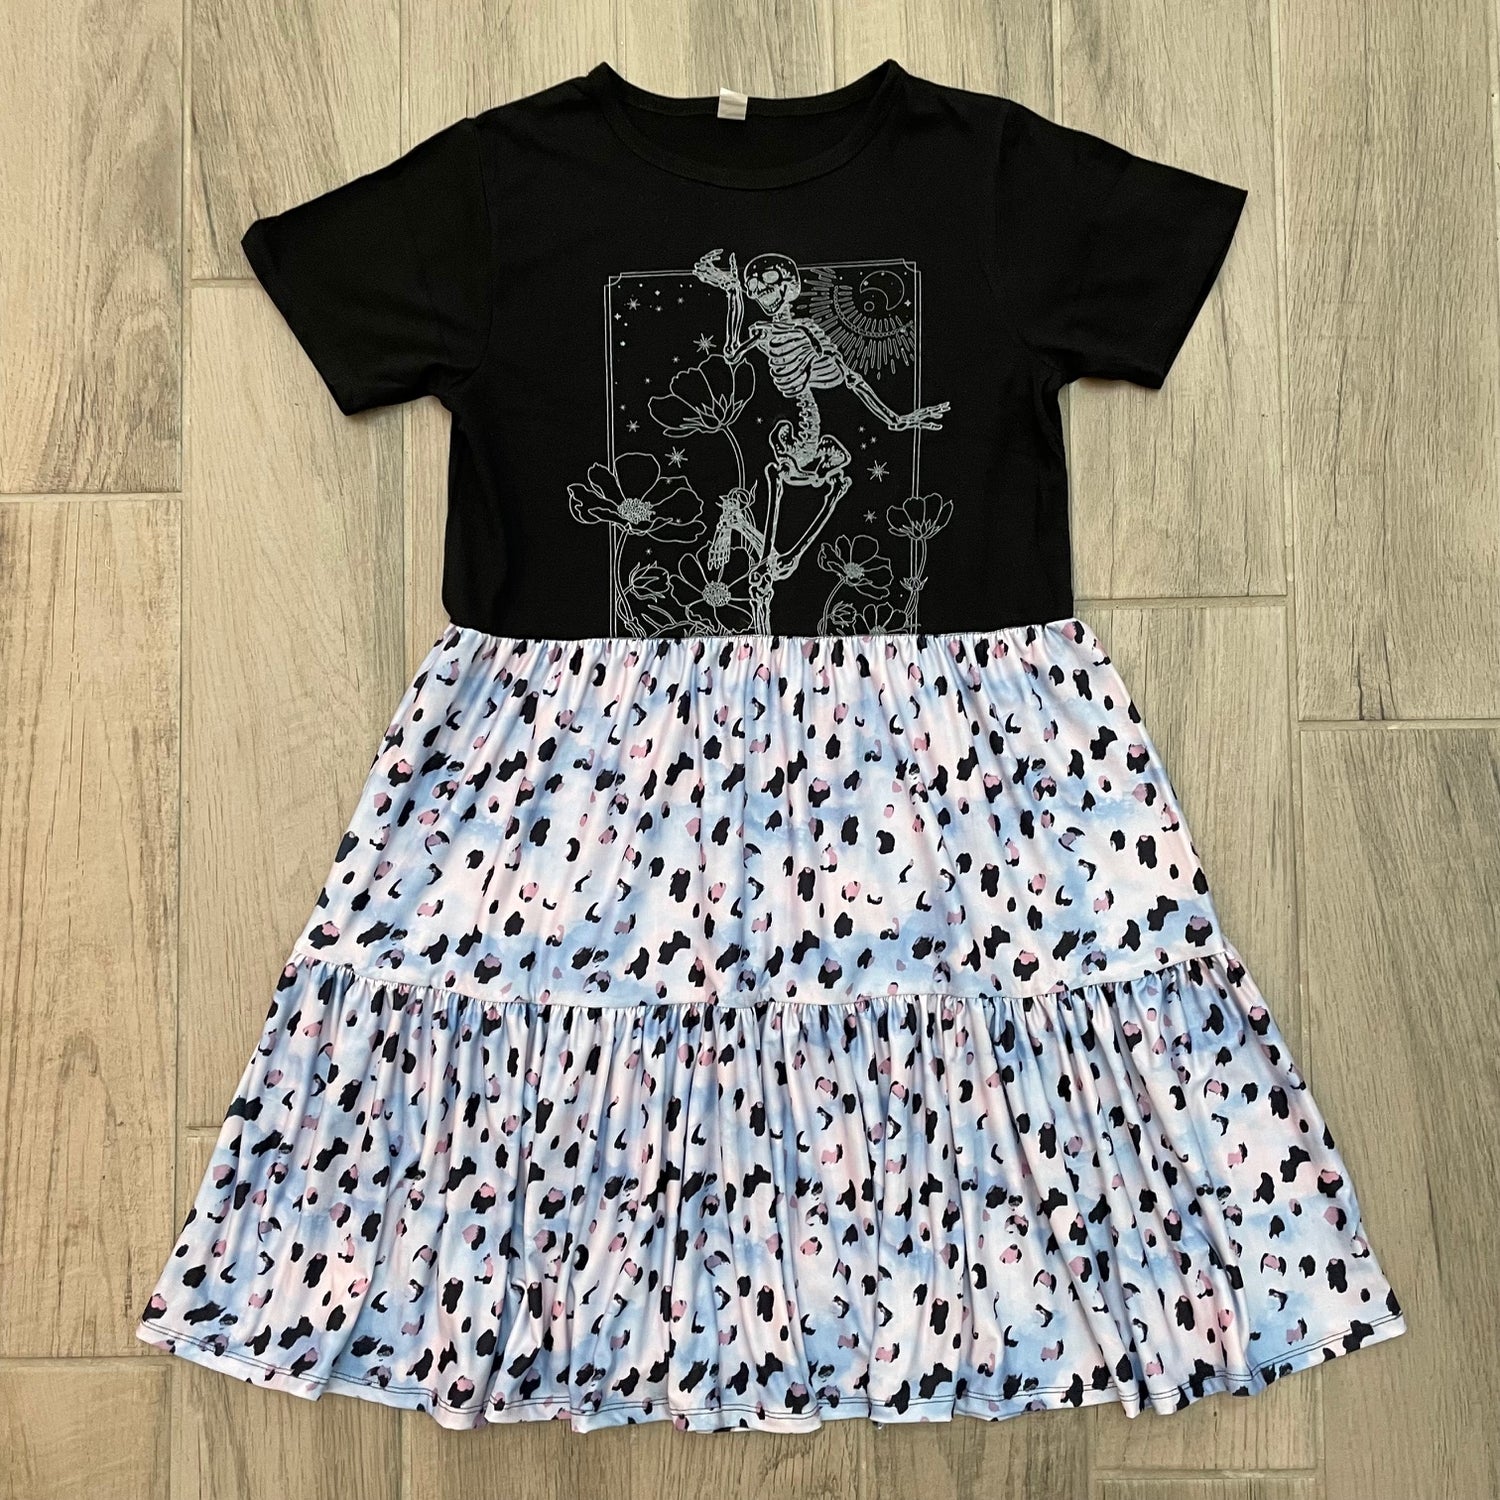 Upcycled Tee Dresses